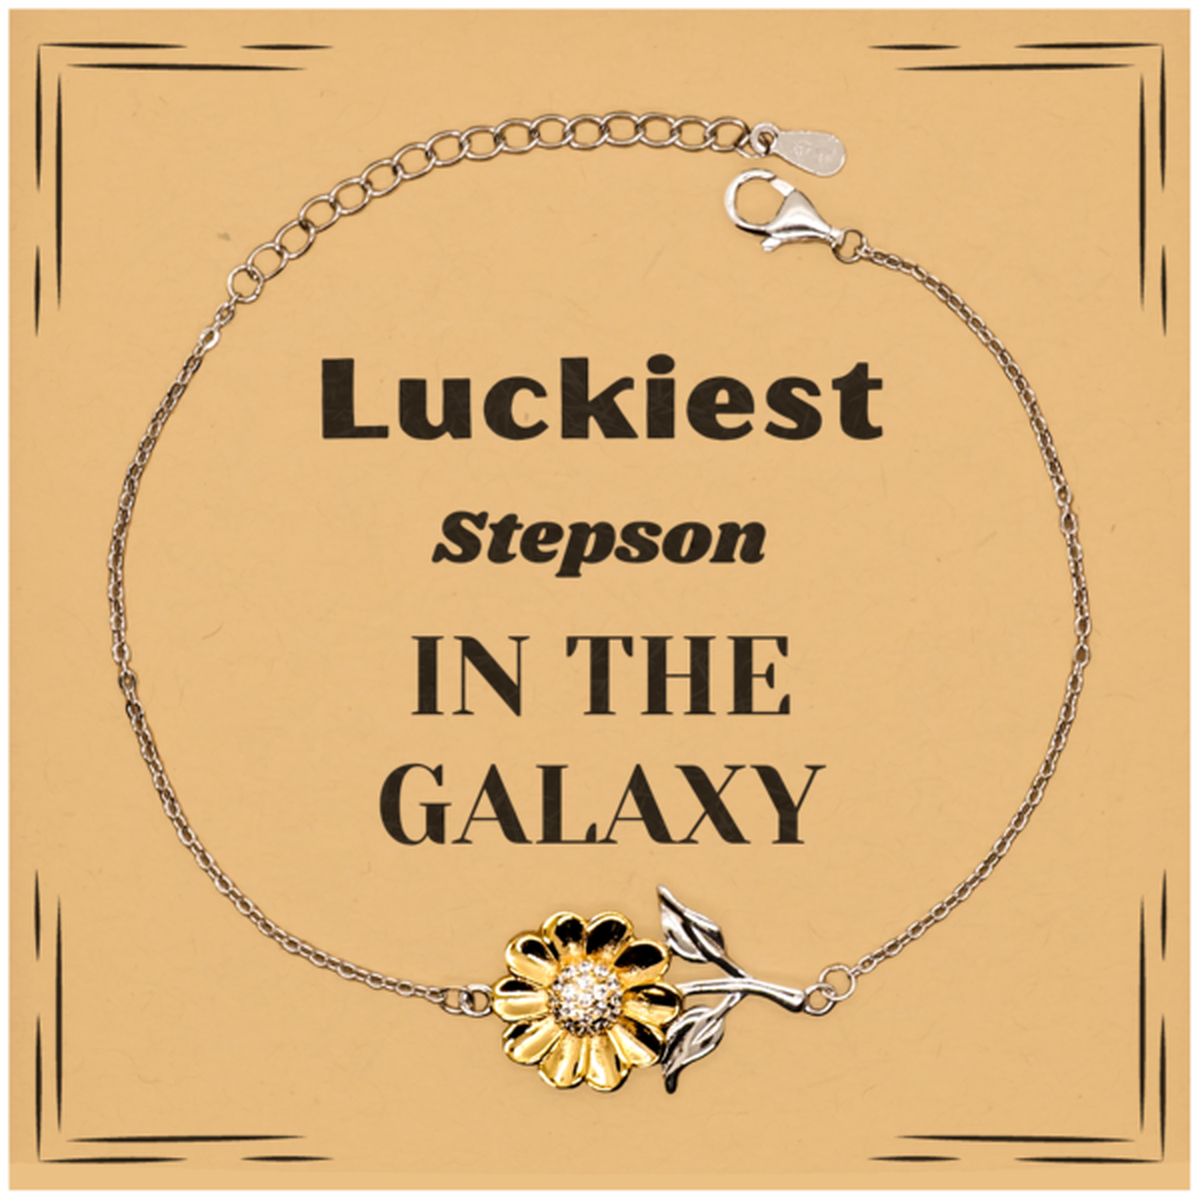 Luckiest Stepson in the Galaxy, To My Stepson Message Card Gifts, Christmas Stepson Sunflower Bracelet Gifts, X-mas Birthday Unique Gifts For Stepson Men Women